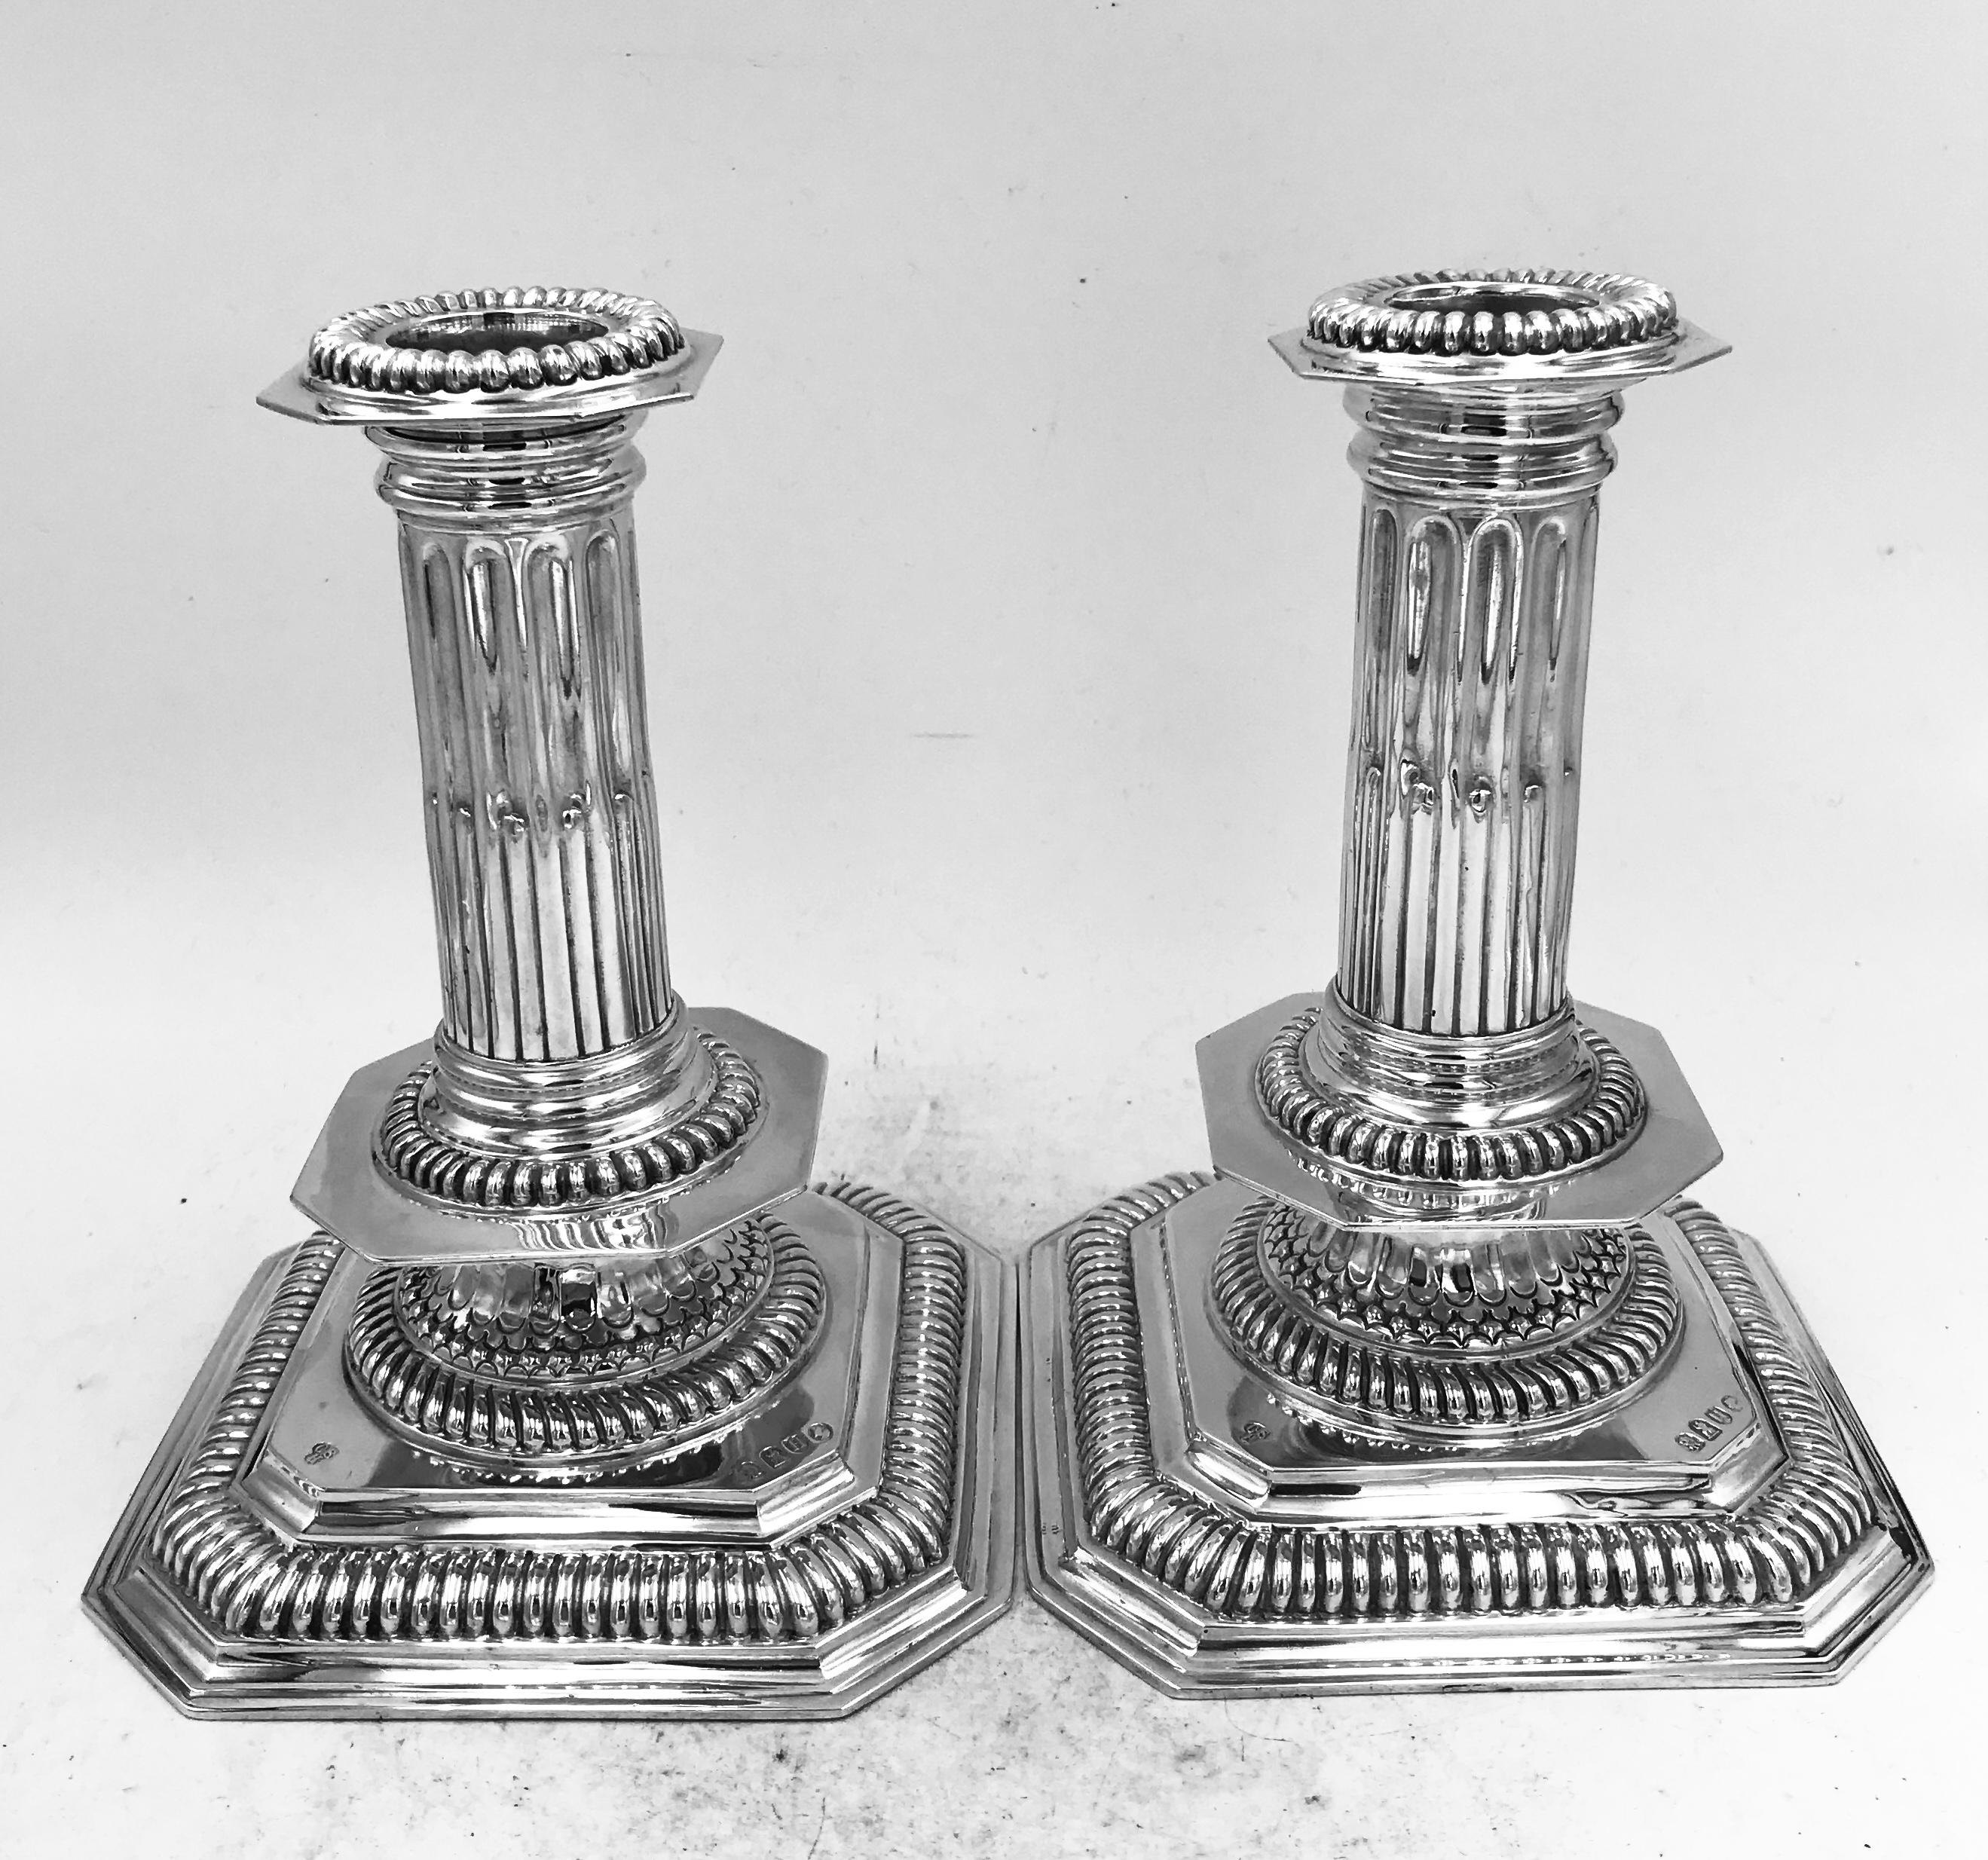 A Pair of Antique English Victorian Sterling Silver Candlesticks made by Charles Stuart Harris, and hallmarked London 1883. 
These candlesticks are nineteenth century examples of candlesticks originally made in England in the late seventeenth and